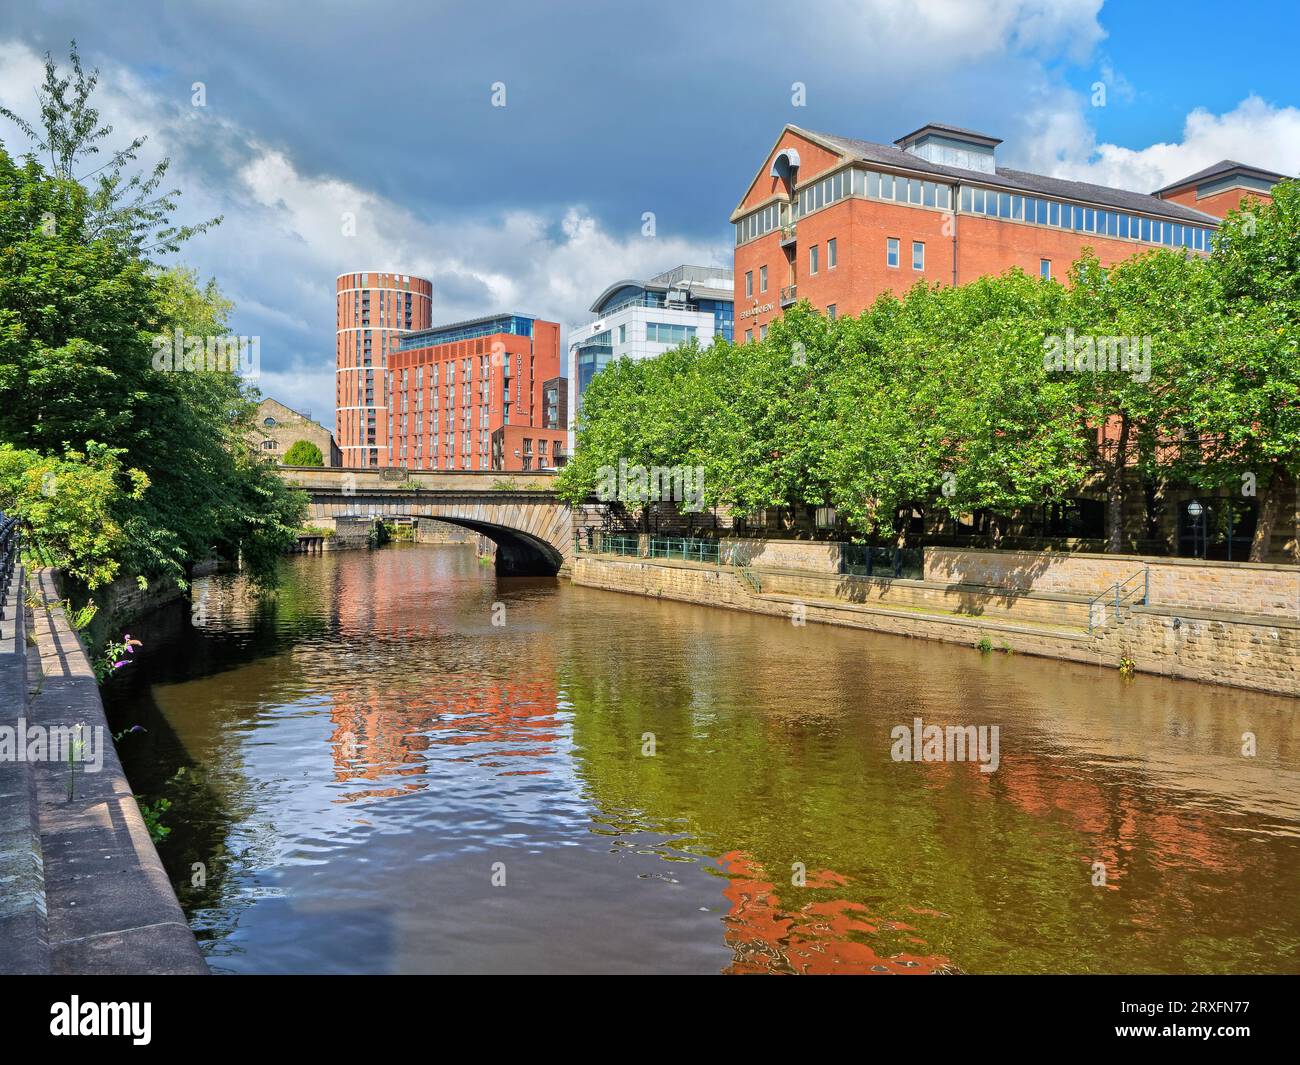 UK, West Yorkshire, Leeds, Victoria Bridge over the River Aire, surrounded by the Hilton Hotel, Office Buildings & Modern Waterfront Apartments. Stock Photo